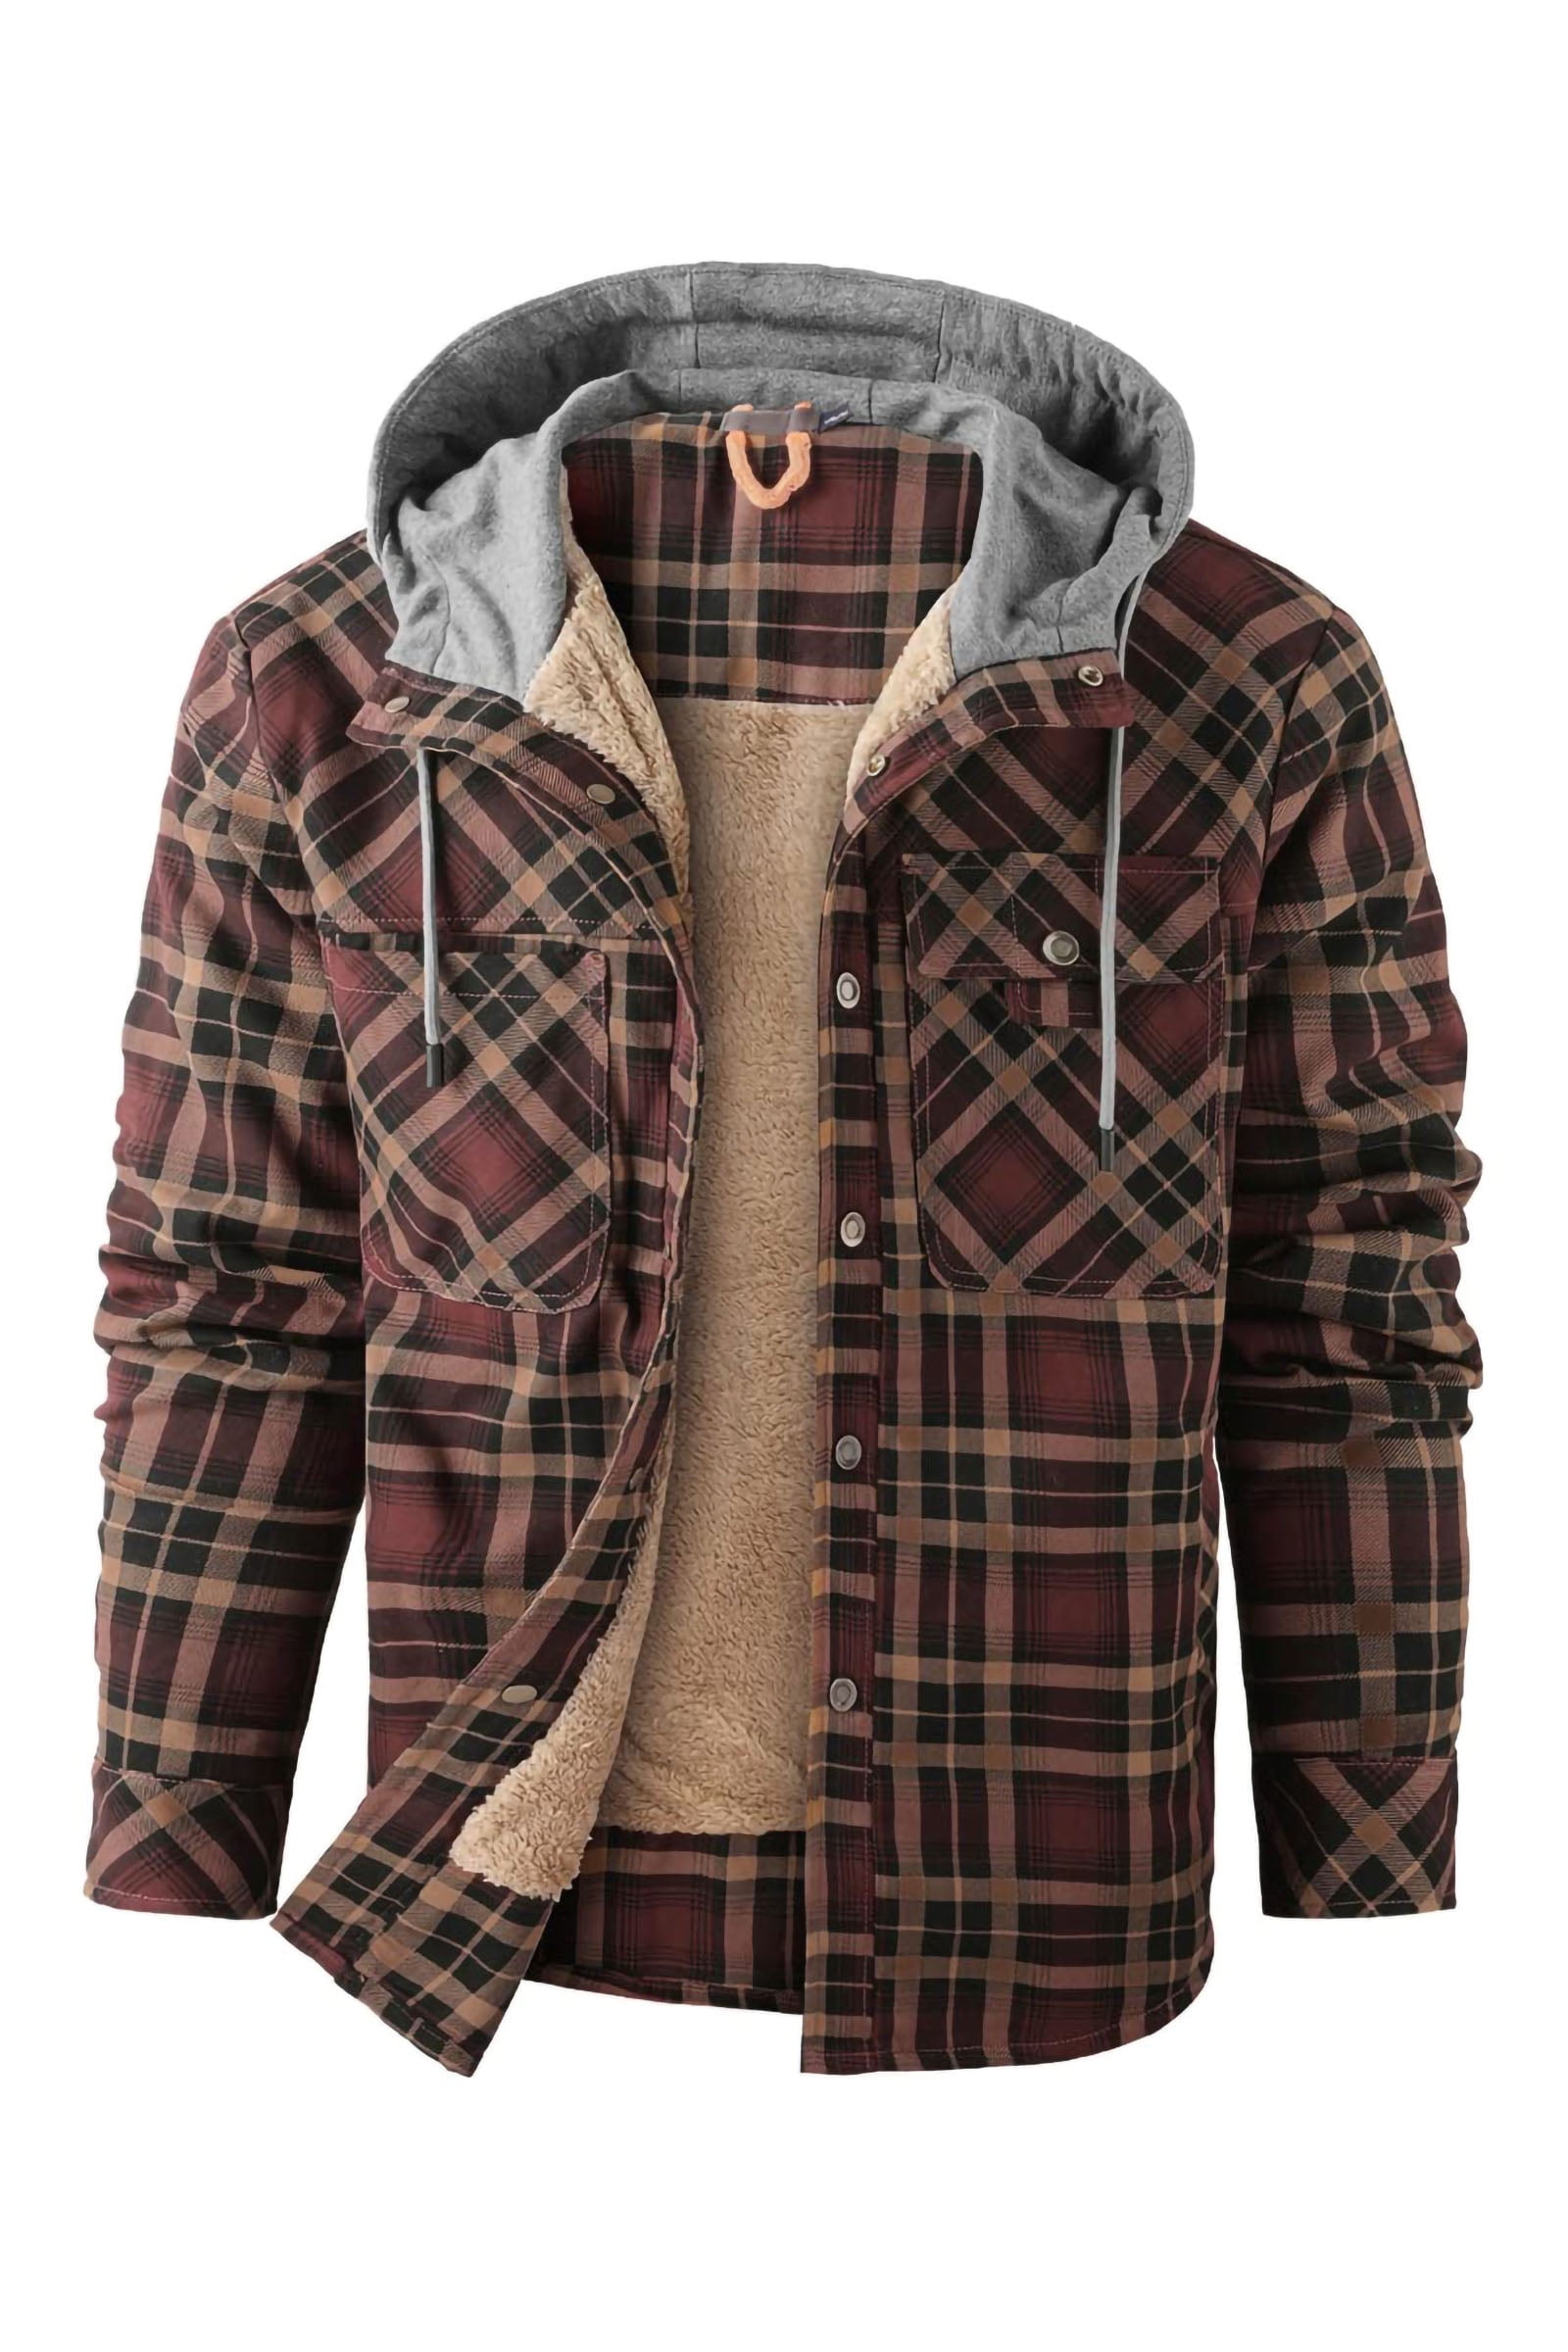 Niumike Outdoor Casual Vintage Long Sleeve Plaid Flannel Button Down ...